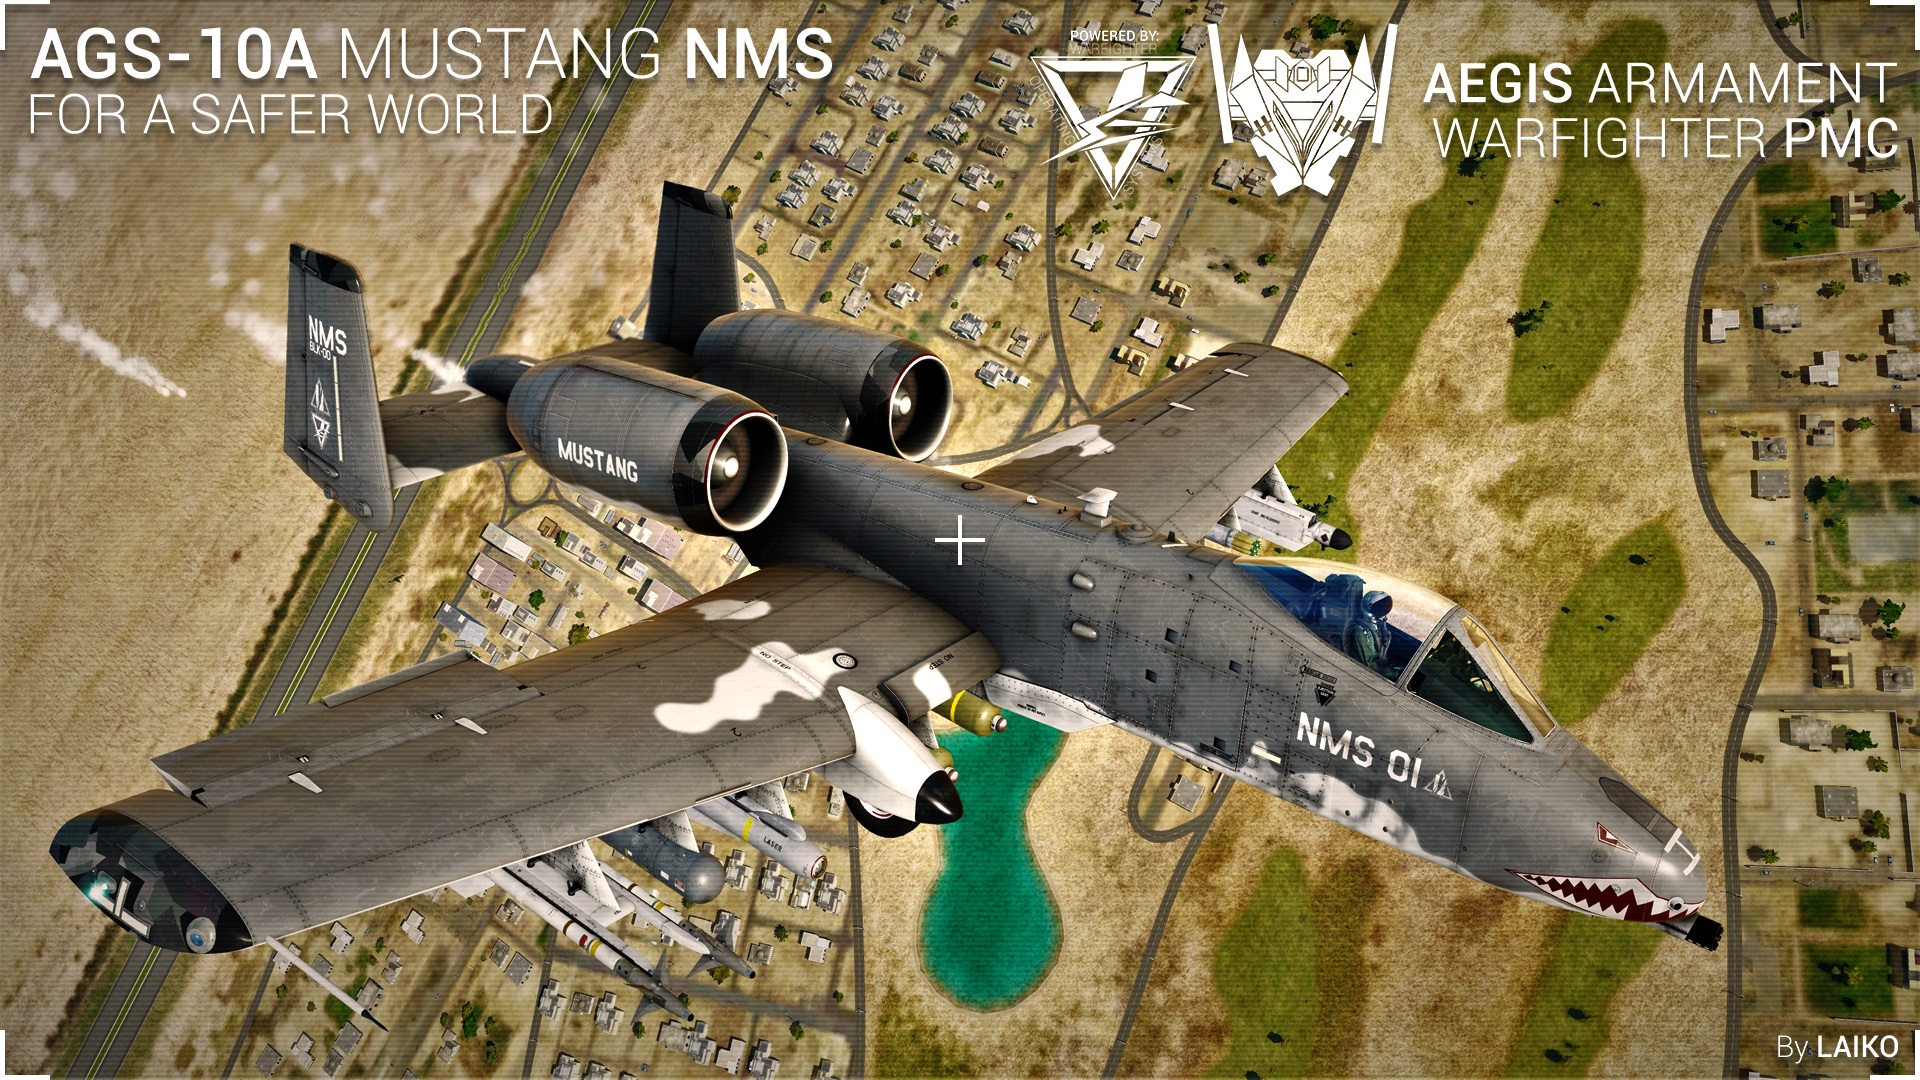 AGS-10A NMS MUSTANG